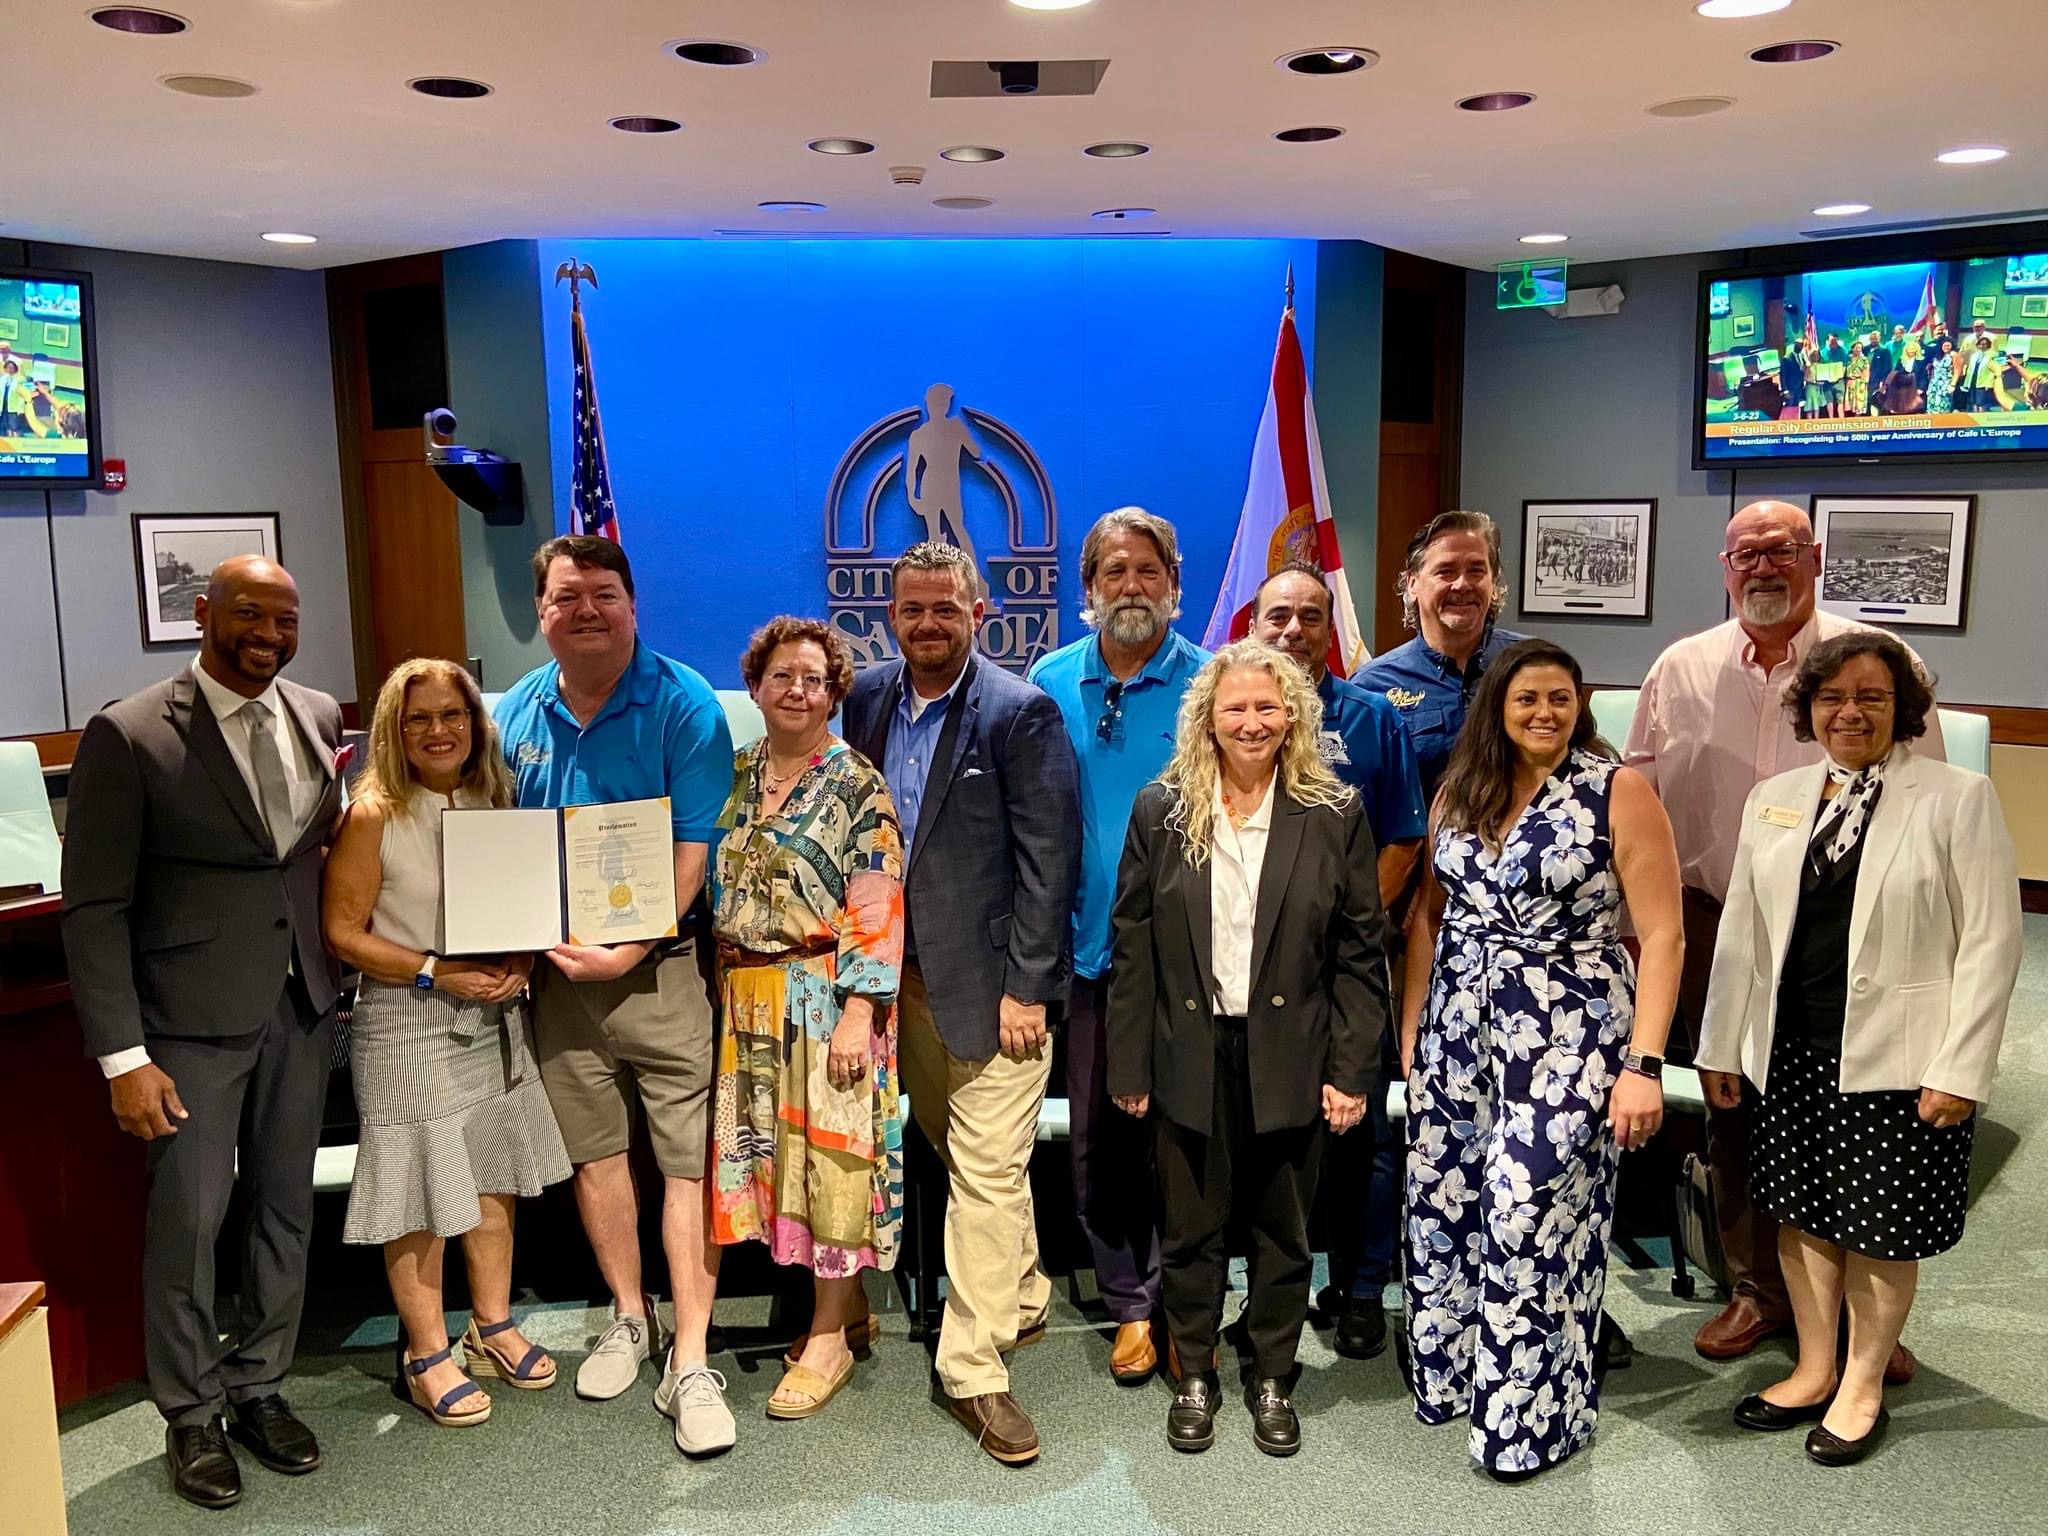 Proclamation from the City of Sarasota